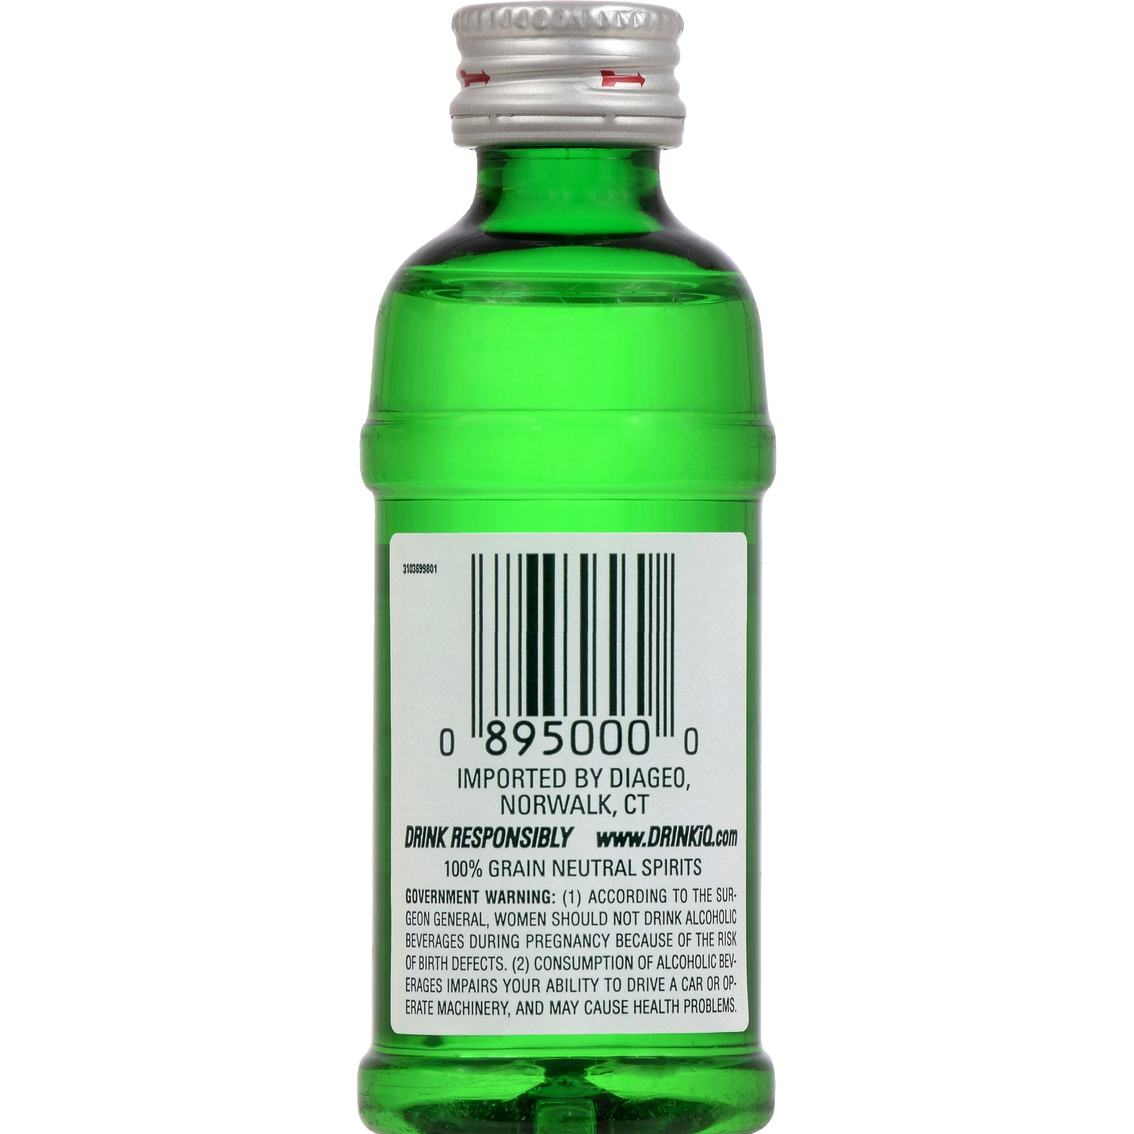 Tanqueray Gin 50ml - Image 2 of 2